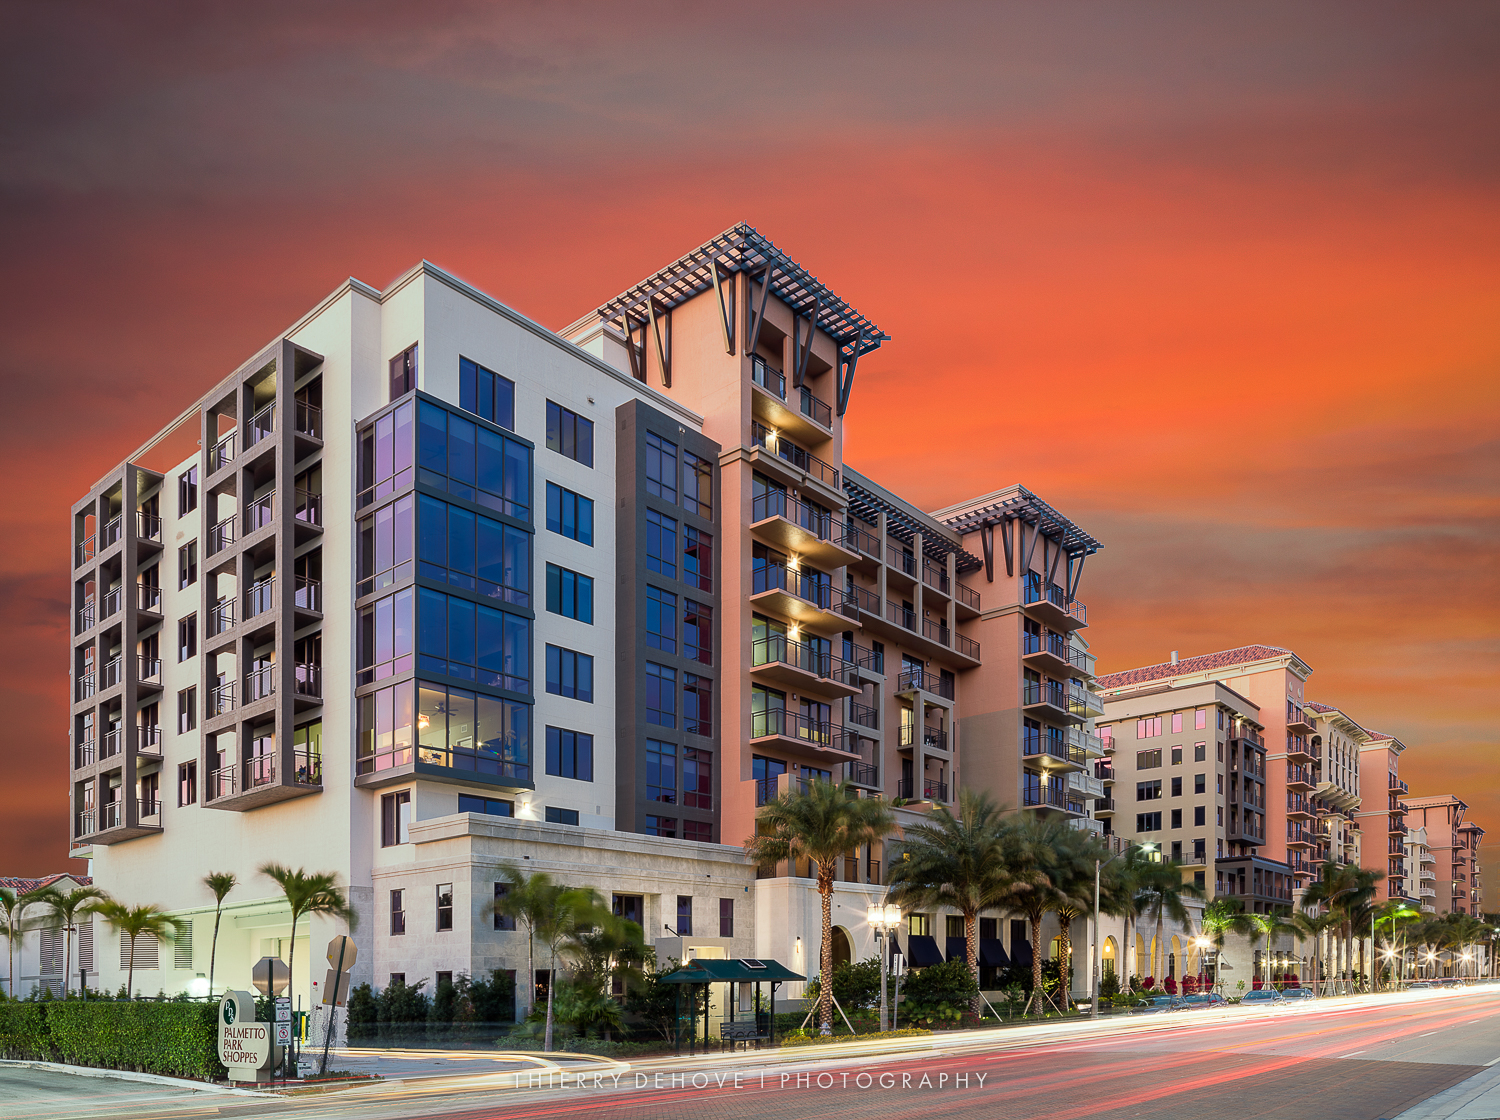 Palmetto Promenade Apartments by Kast Construction